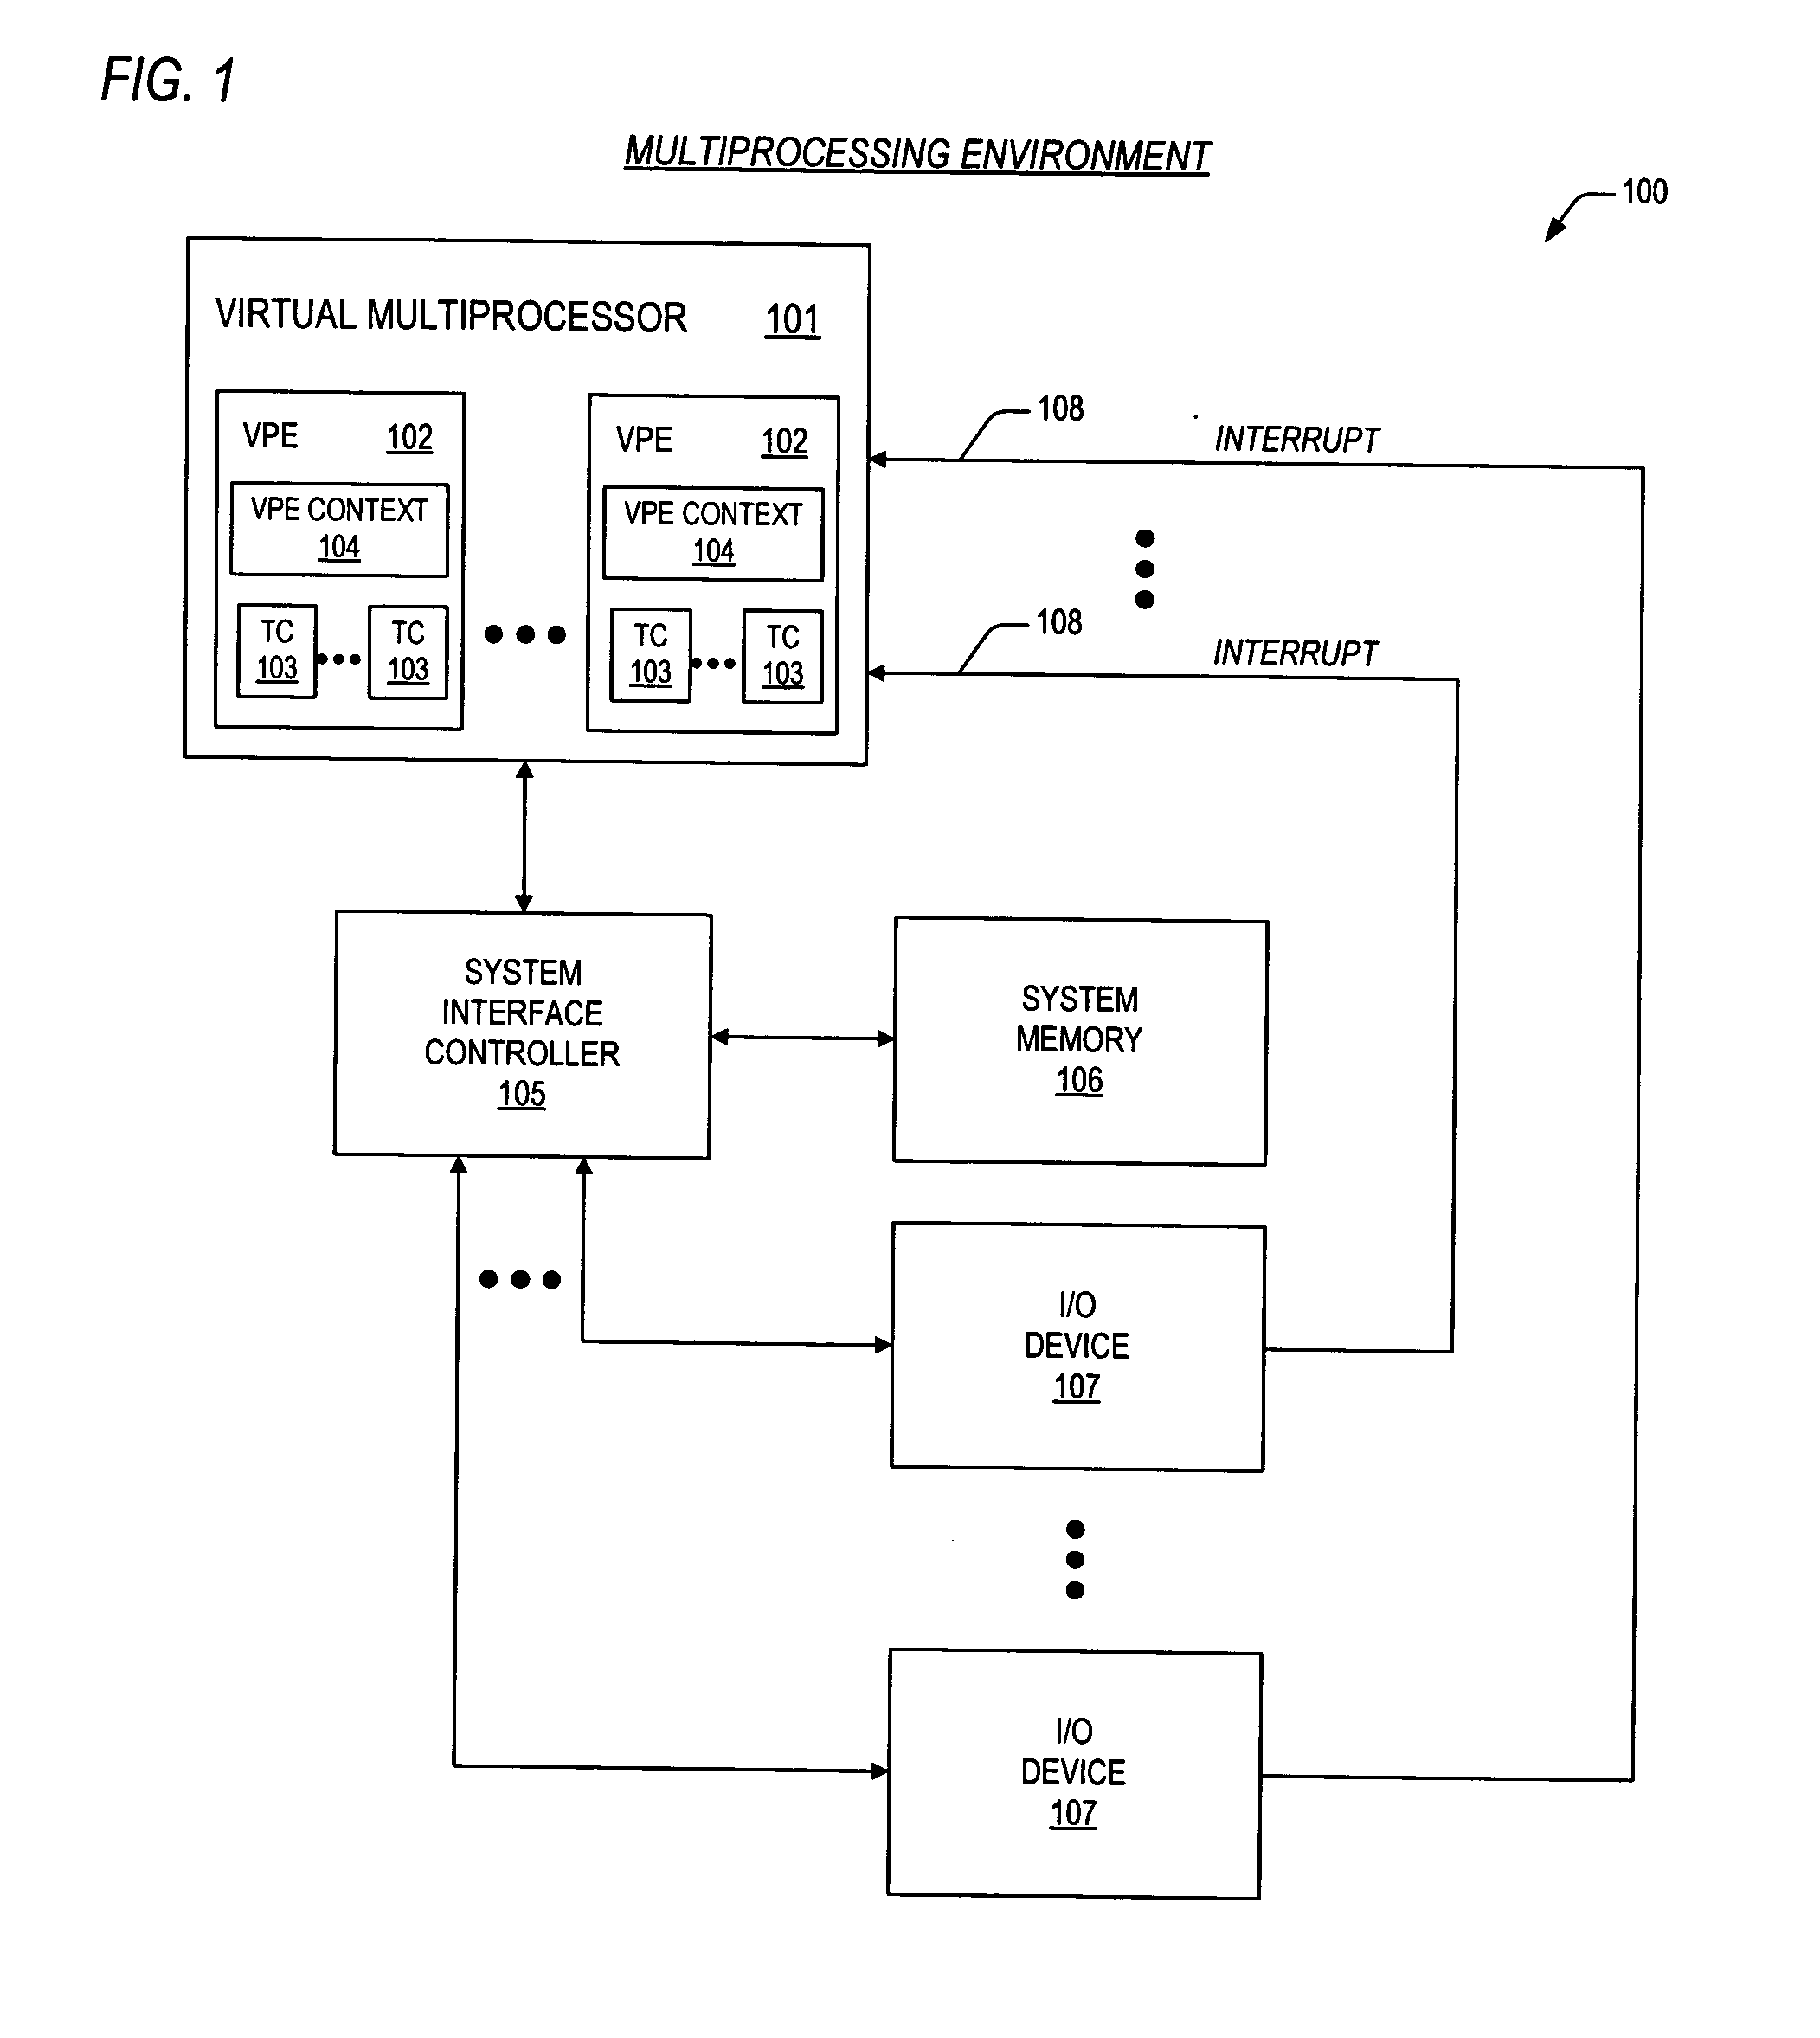 Mechanisms for dynamic configuration of virtual processor resources